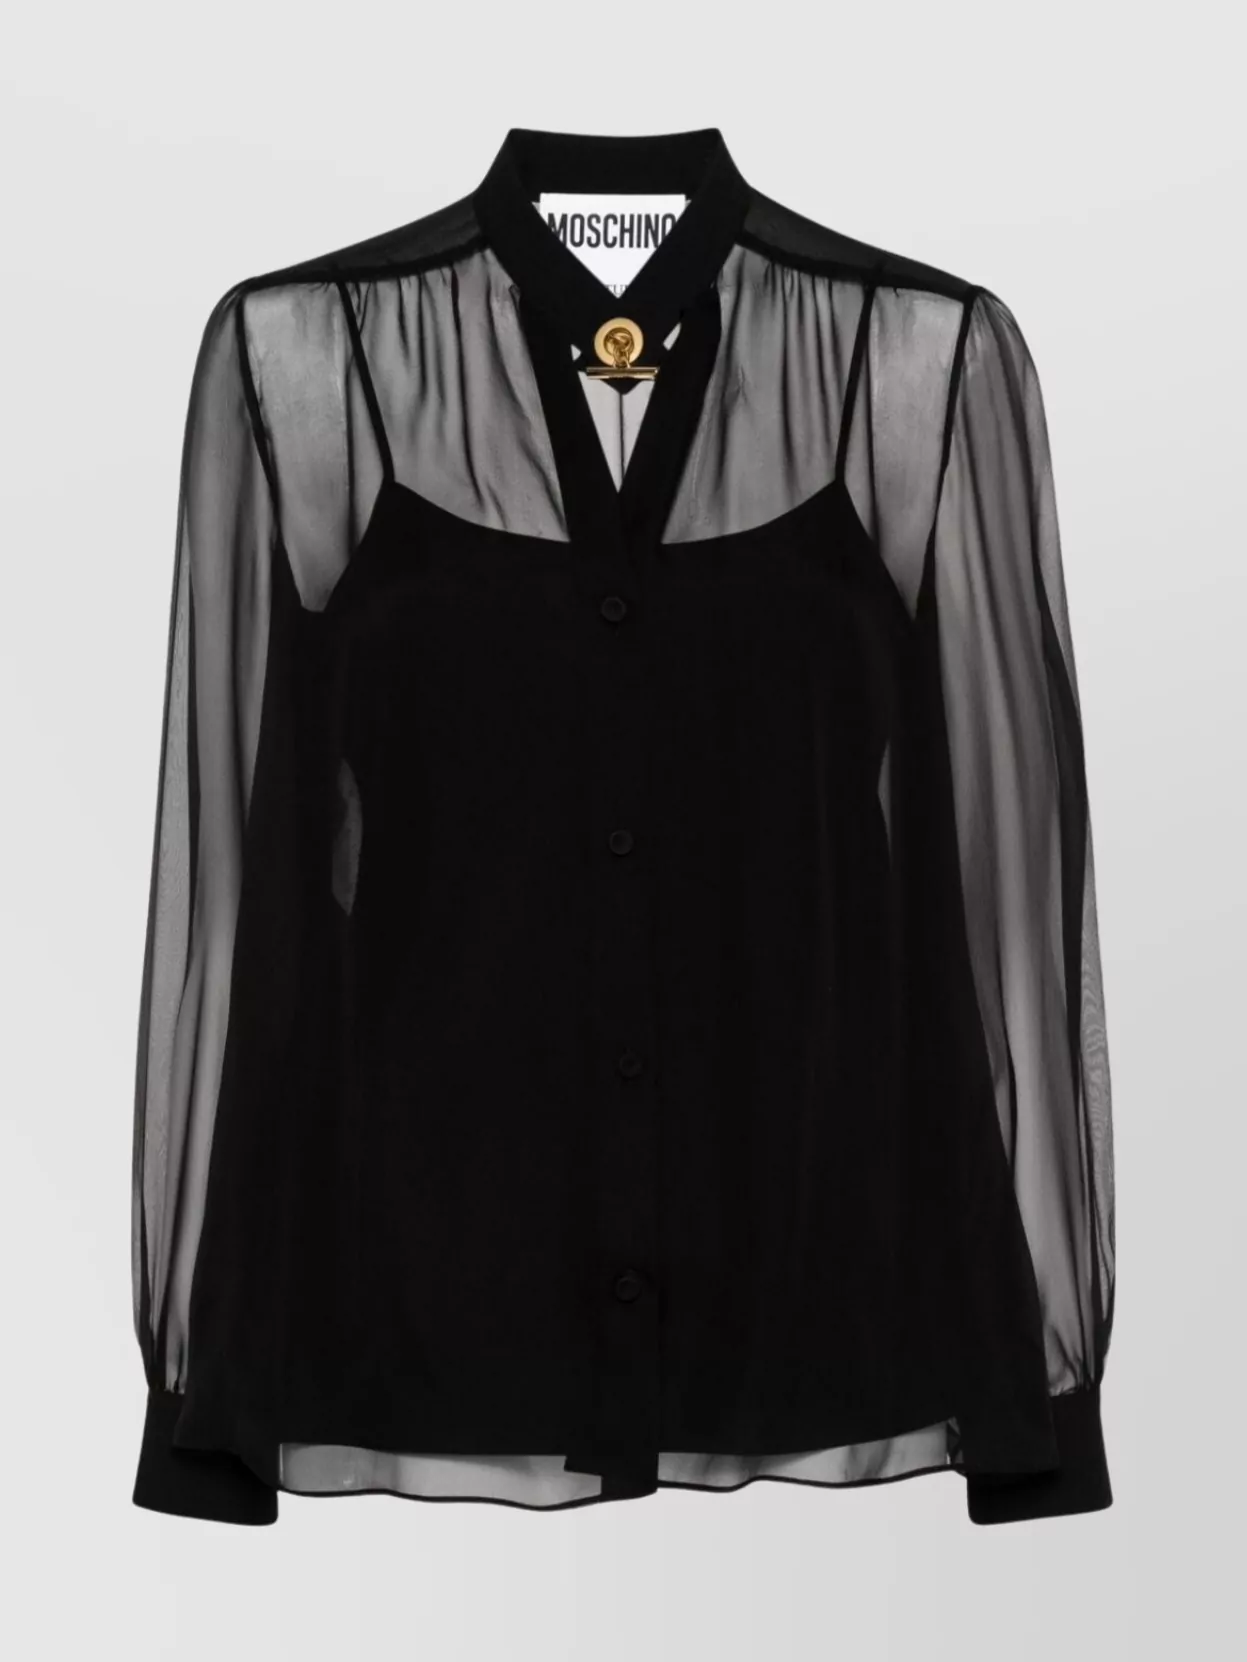 MOSCHINO TRANSPARENT SLEEVES SHEER LAYERED TOP